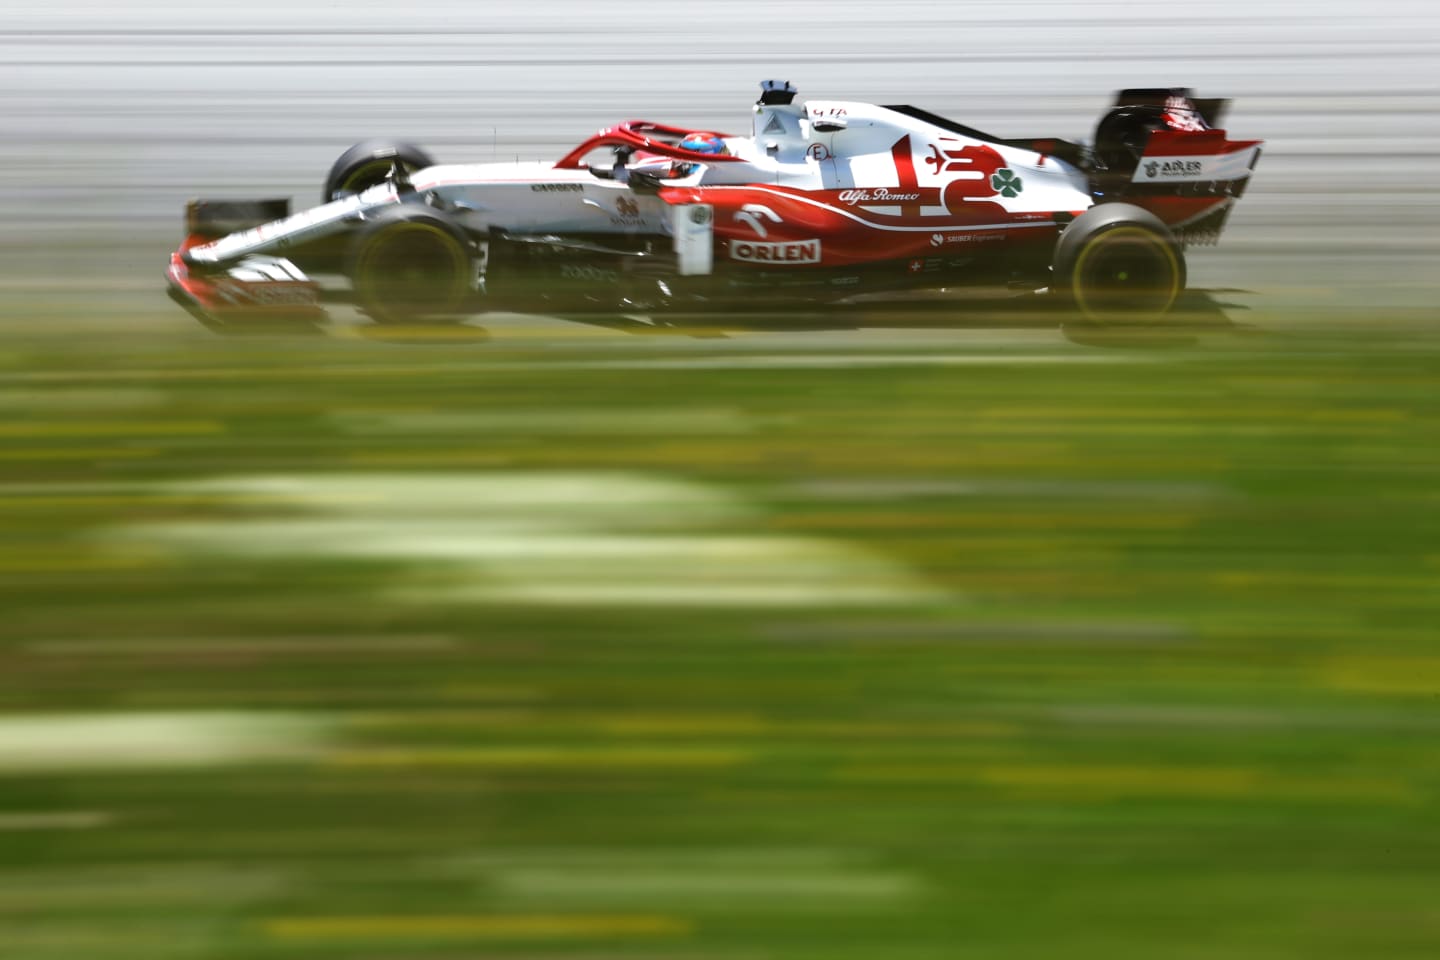 SPIELBERG, AUSTRIA - JULY 03: Kimi Raikkonen of Finland driving the (7) Alfa Romeo Racing C41 Ferrari during final practice ahead of the F1 Grand Prix of Austria at Red Bull Ring on July 03, 2021 in Spielberg, Austria. (Photo by Bryn Lennon/Getty Images)